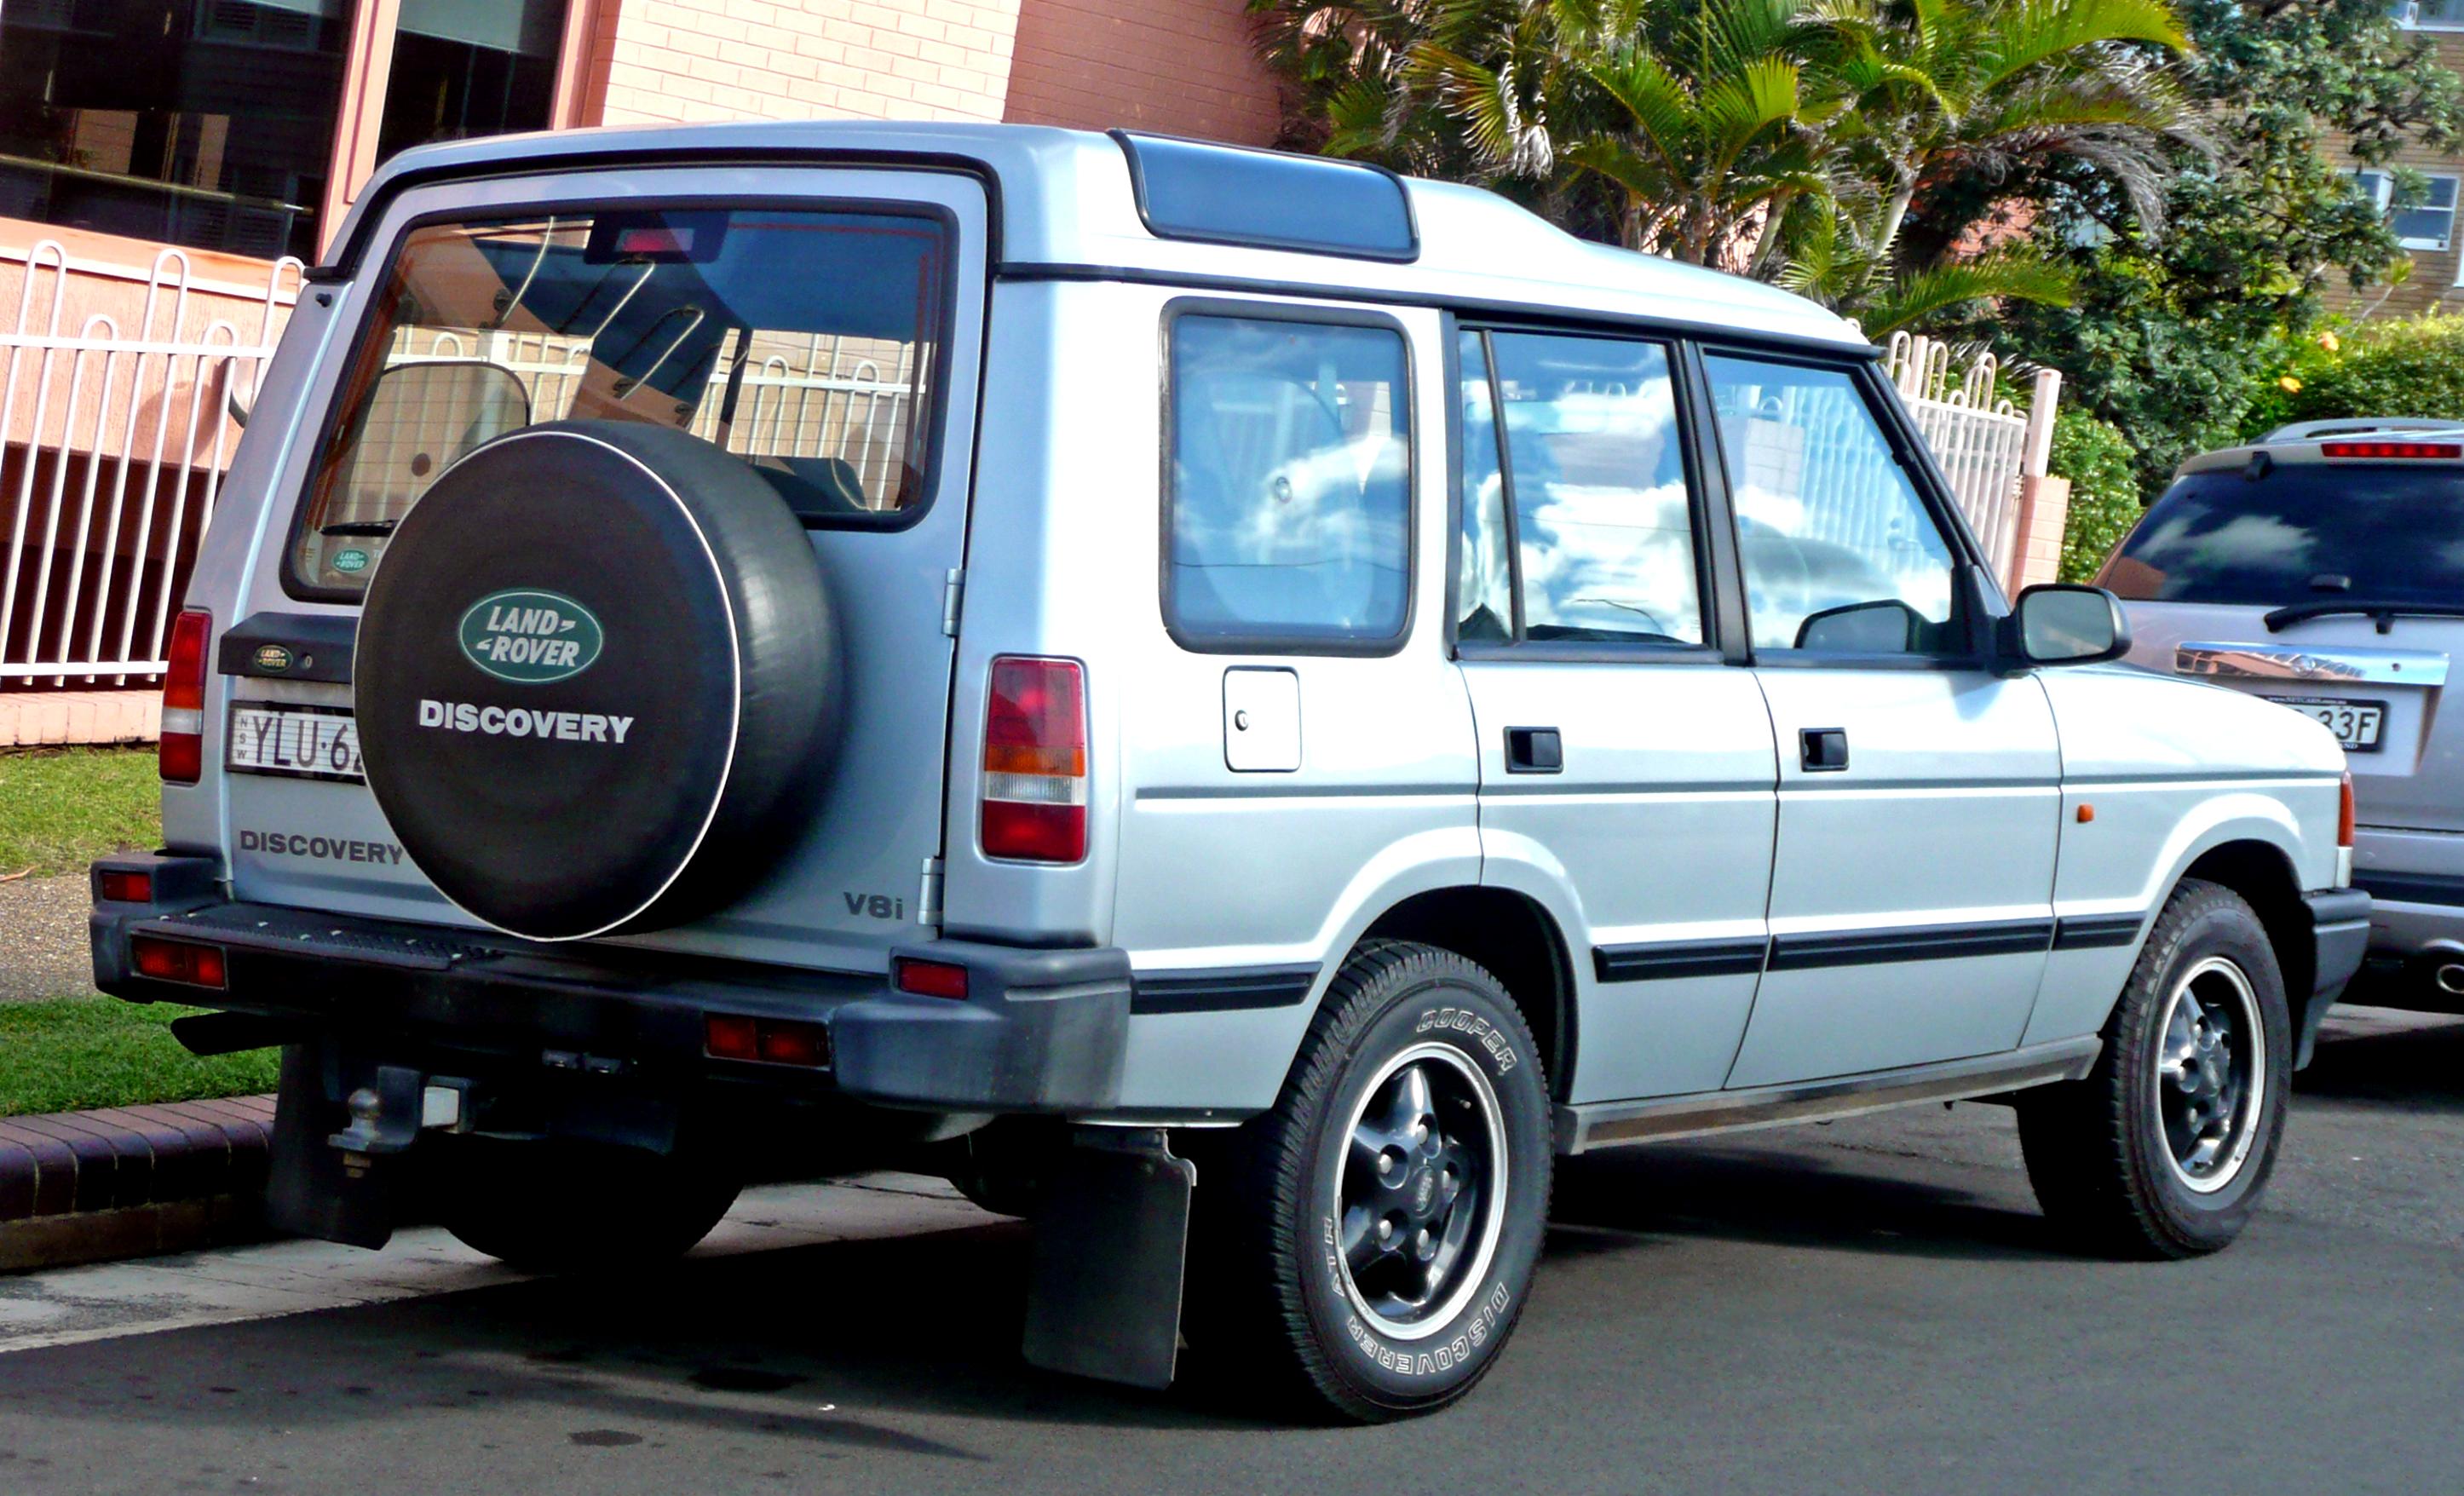 Land Rover Discovery 1990 #1